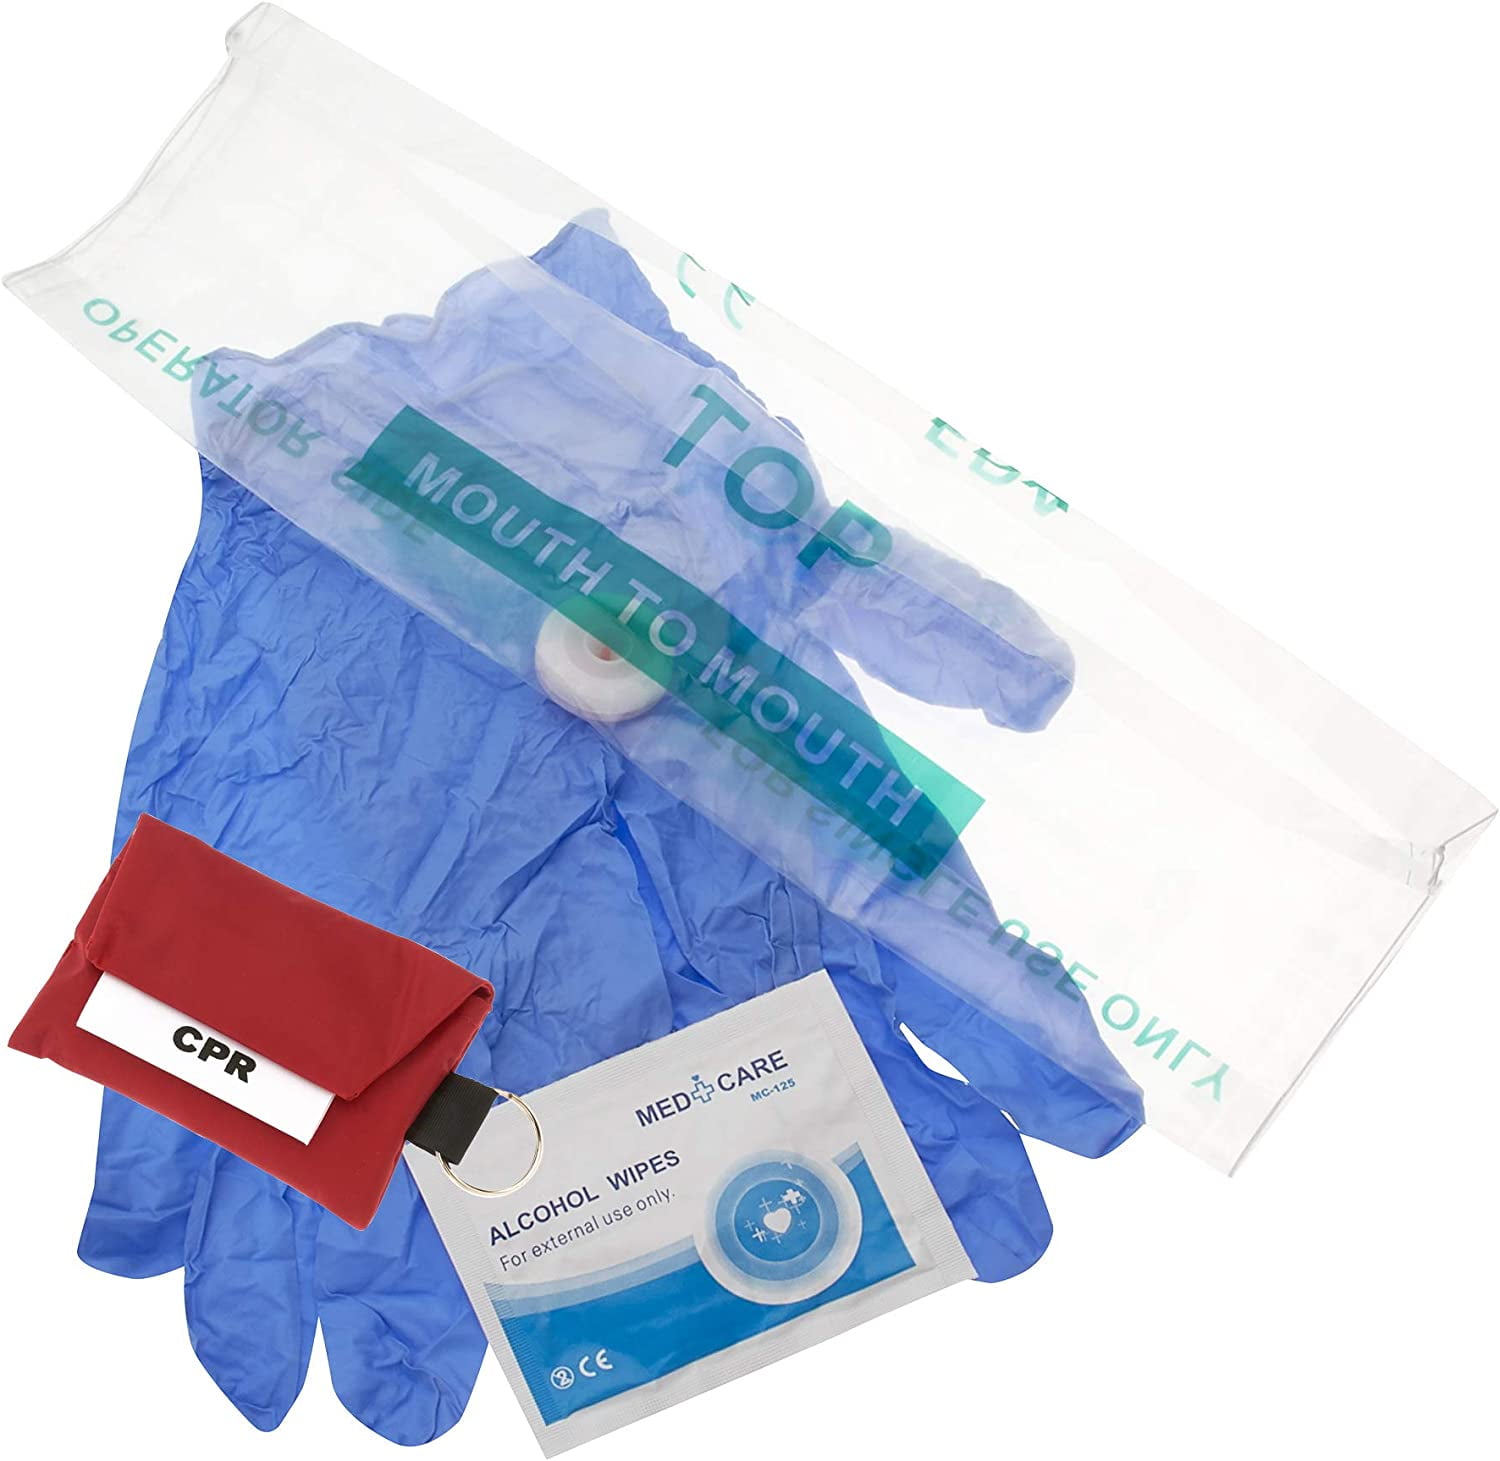 Airplane Pockets Hand Sanitizer and 10pc Face Mask Kit